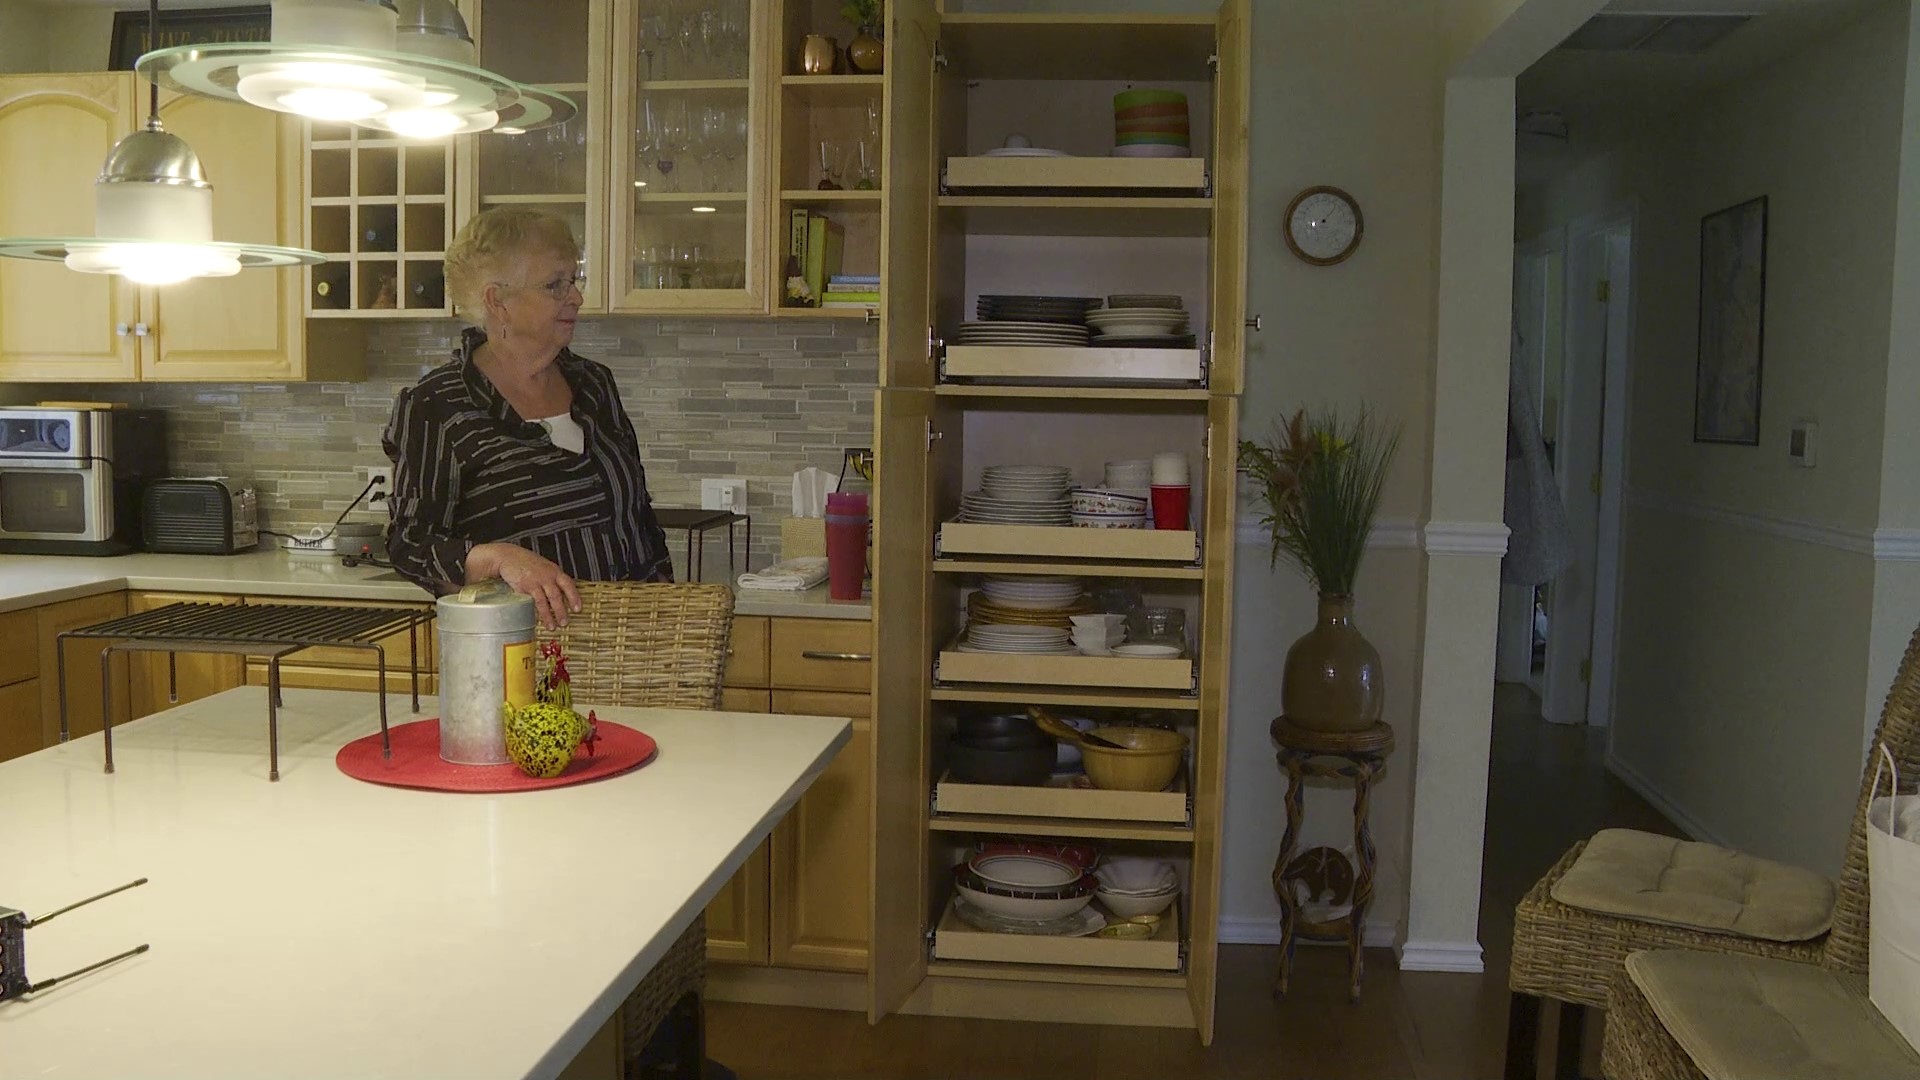 We recently met Pamela in Kirkland whose kitchen storage just wasn't working for her. She called our friends at ShelfGenie to help out! Sponsored by ShelfGenie.